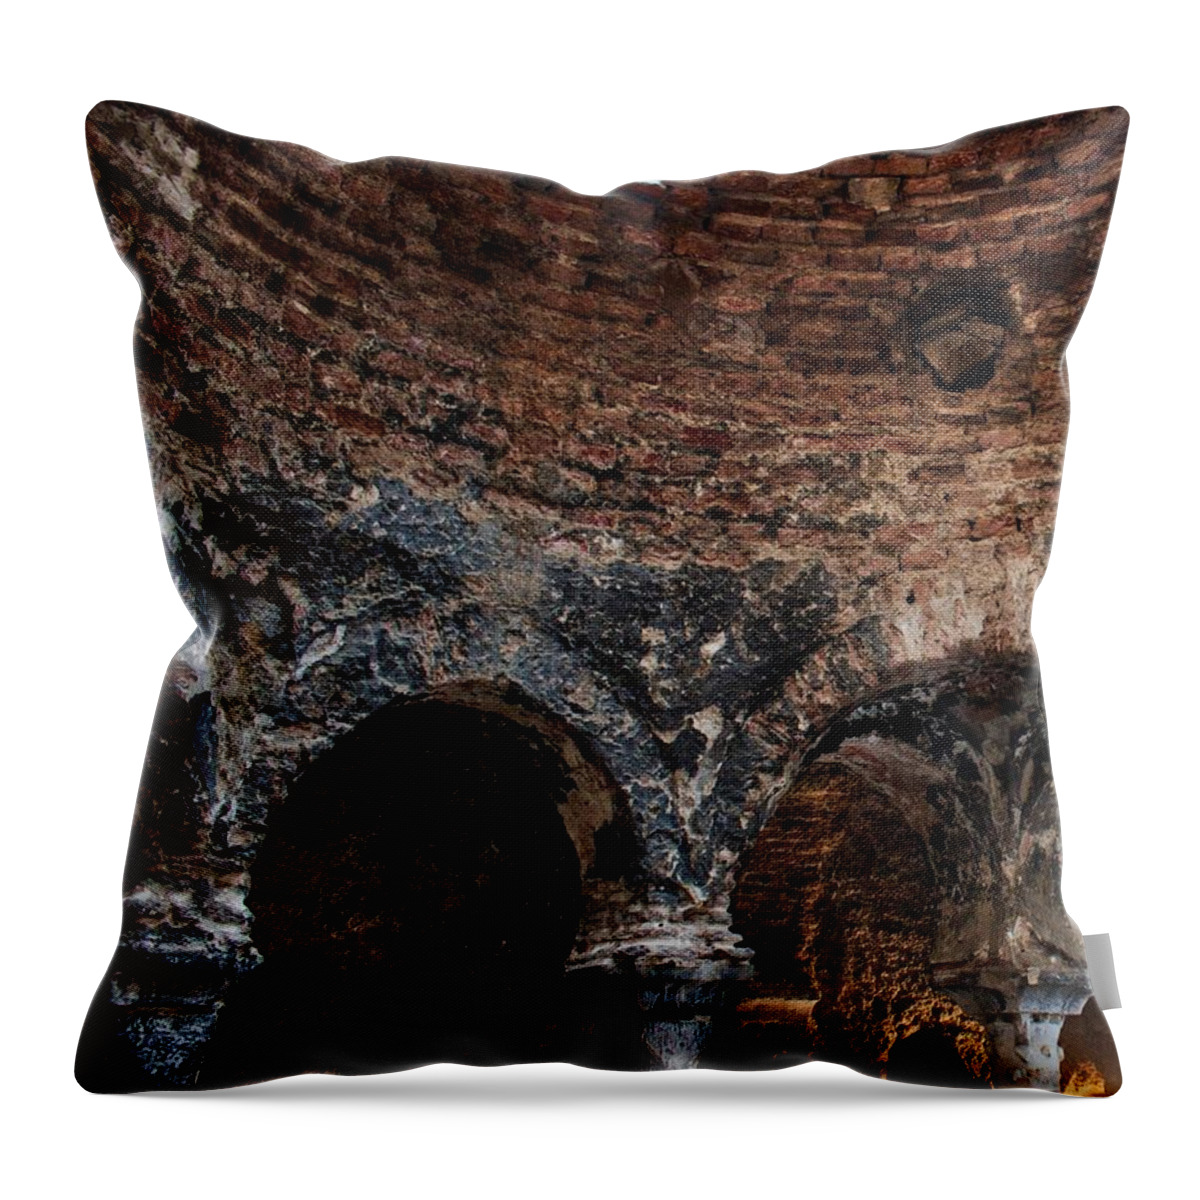 Building Throw Pillow featuring the photograph Sunshine In by Portia Olaughlin